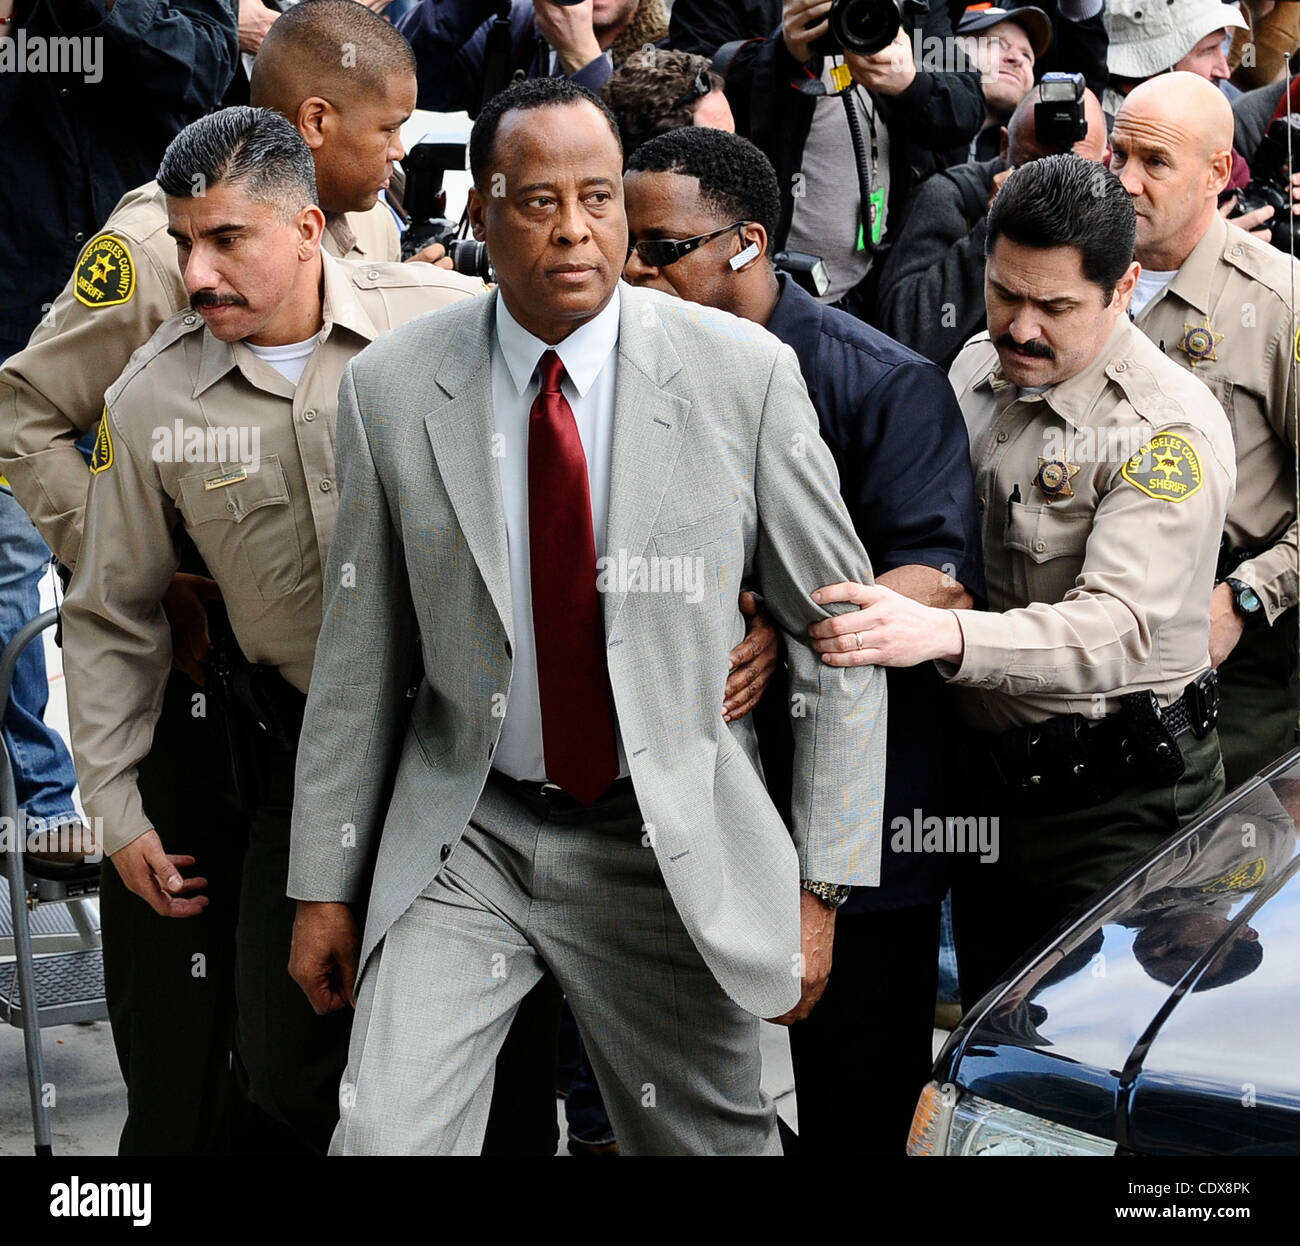 Nov. 07, 2011 - Los Angeles, California, USA - FILE - Michael Jackson's personal physician CONRAD MURRAY has been found guilty of involuntary manslaughter for causing the pop icon's 2009 death by a powerful surgical anesthetic. Pictured: Feb 08, 2010 - Los Angeles, California, USA - Dr. Conrad Murra Stock Photo